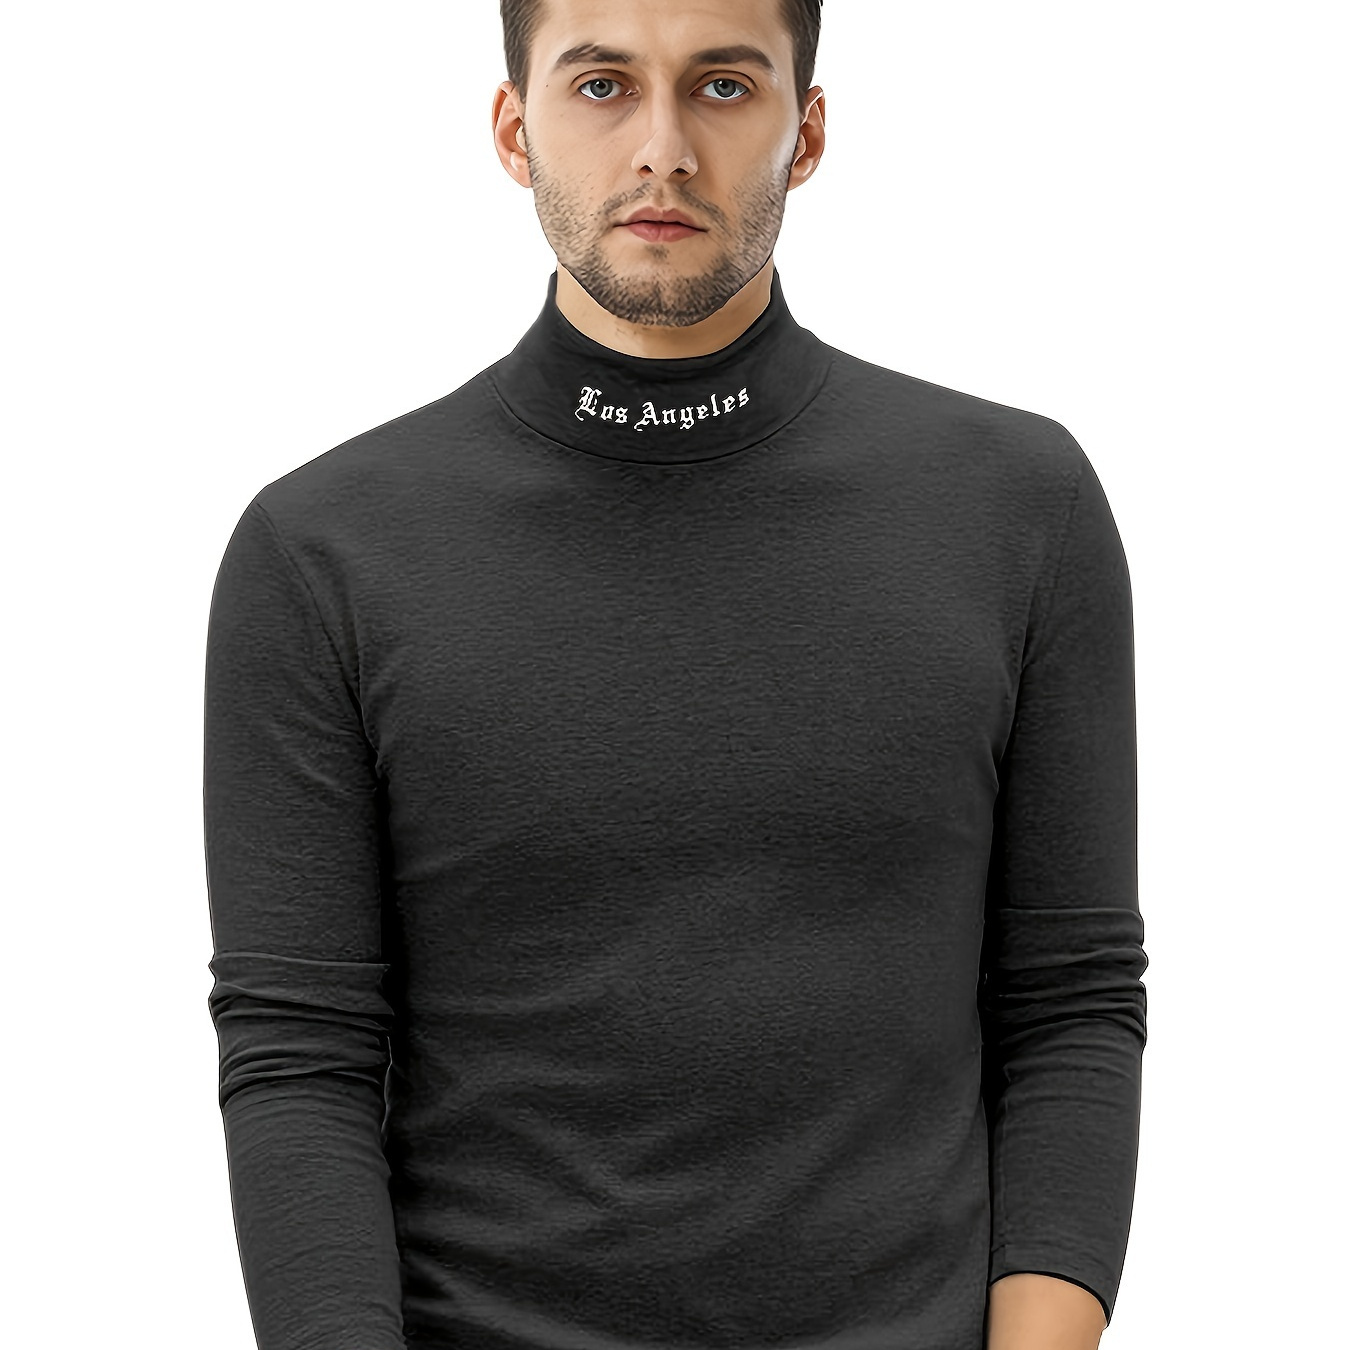 

Men's Letter Print "los Angeles" Skinny Fit Long Sleeve And Turtle Neck Shirt With Fleece, Casual And Chic Tops For Daily And Sports Wear